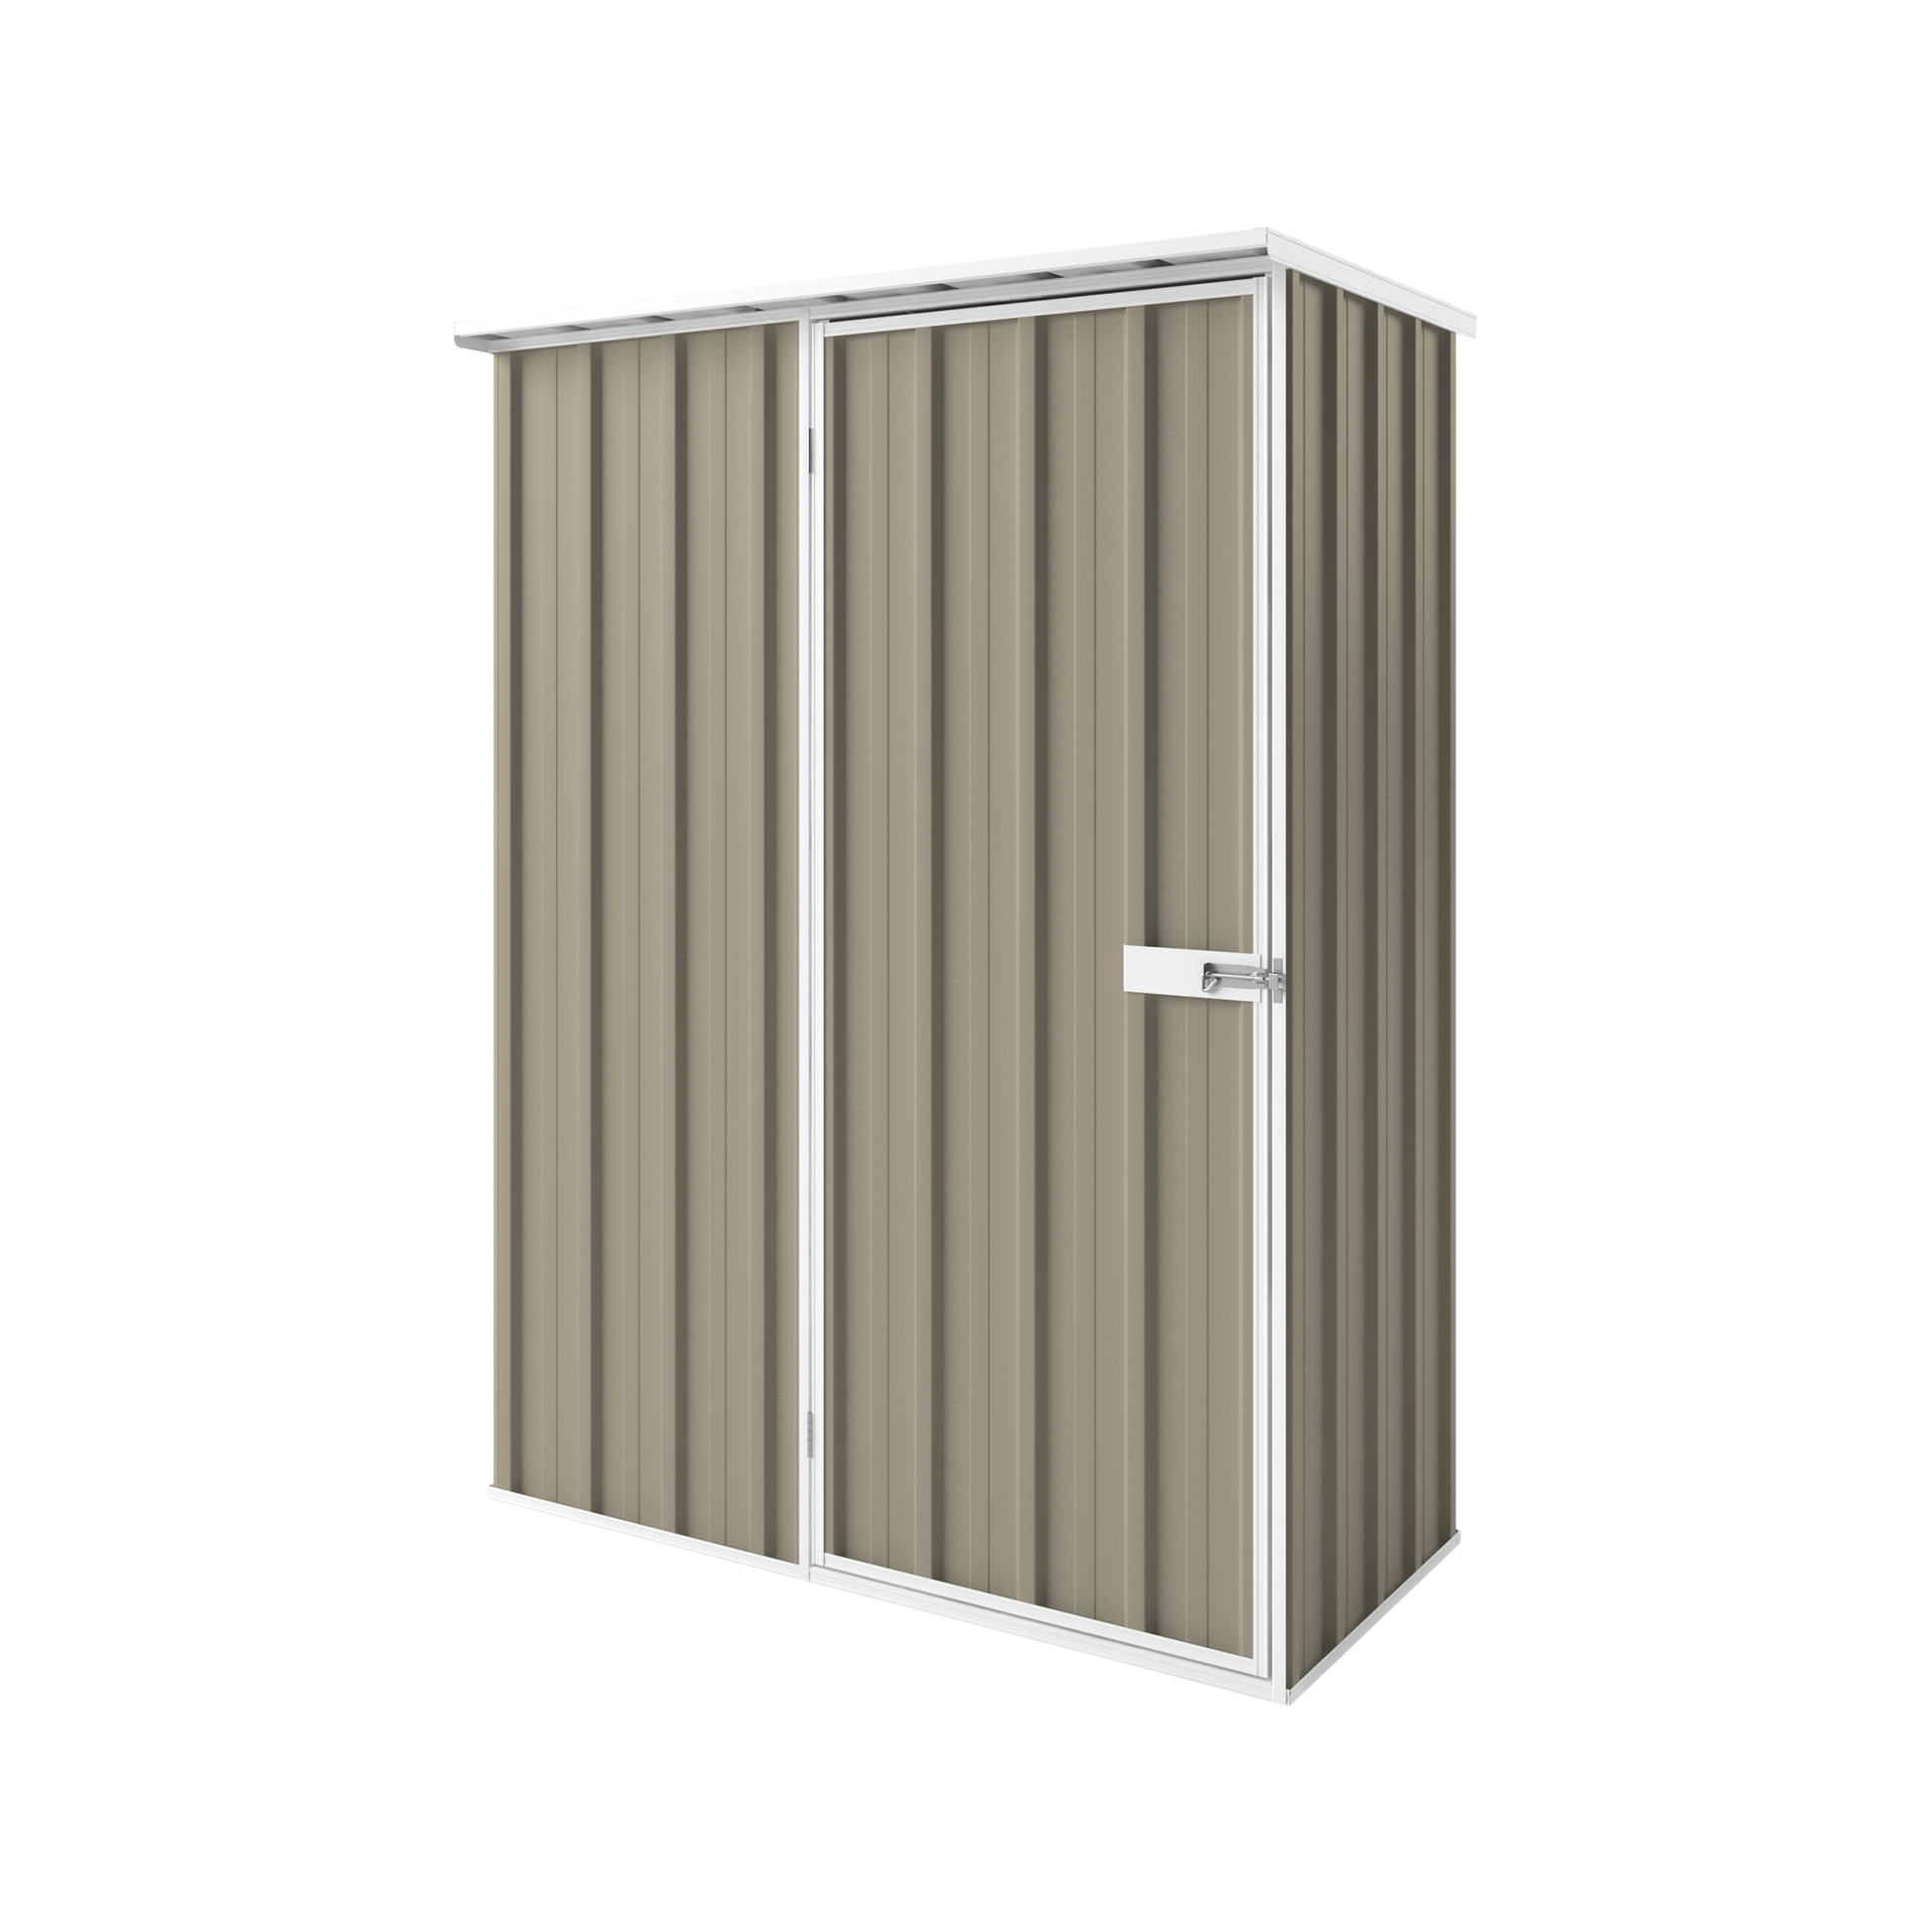 1.5m x 0.78m Flat Roof Garden Shed - EasyShed